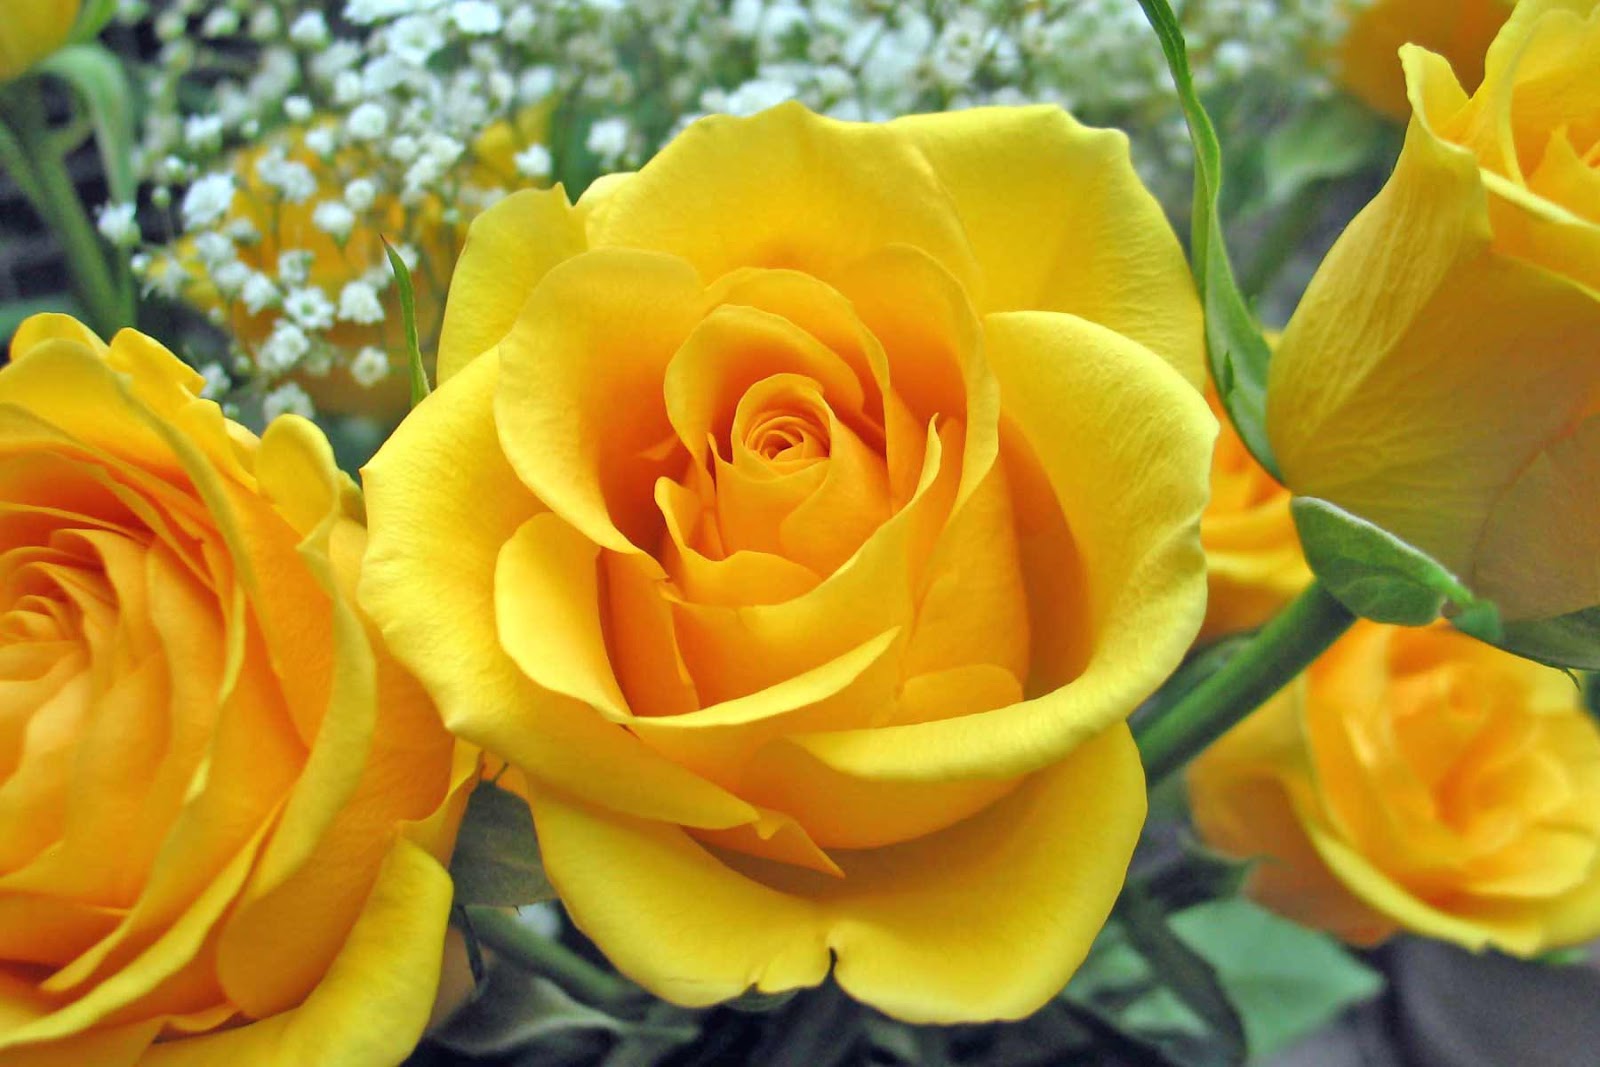 Yellow Rose Flowers Flower HD Wallpaper Image Pictures Tattoos